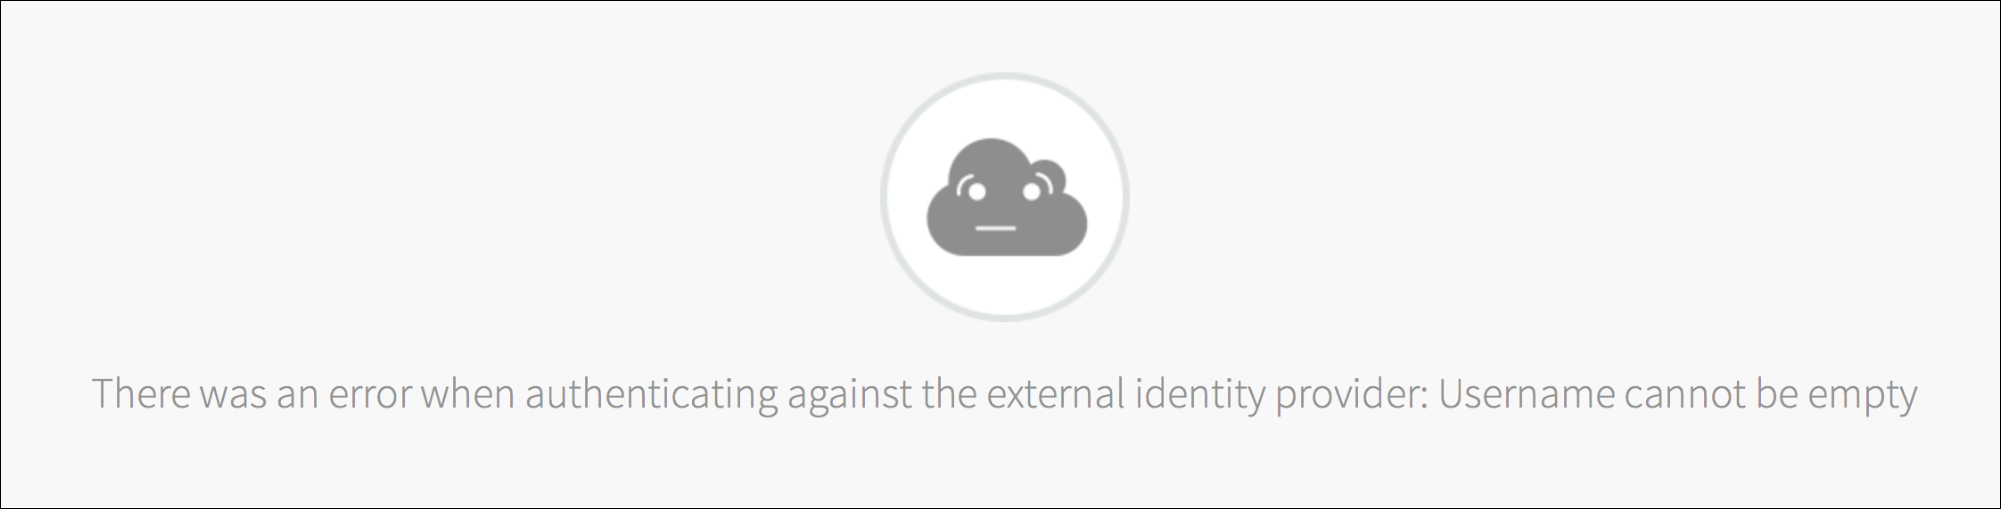 The error message page reads,
There was an error when authenticating against the external identity provider:
Username cannot be empty.